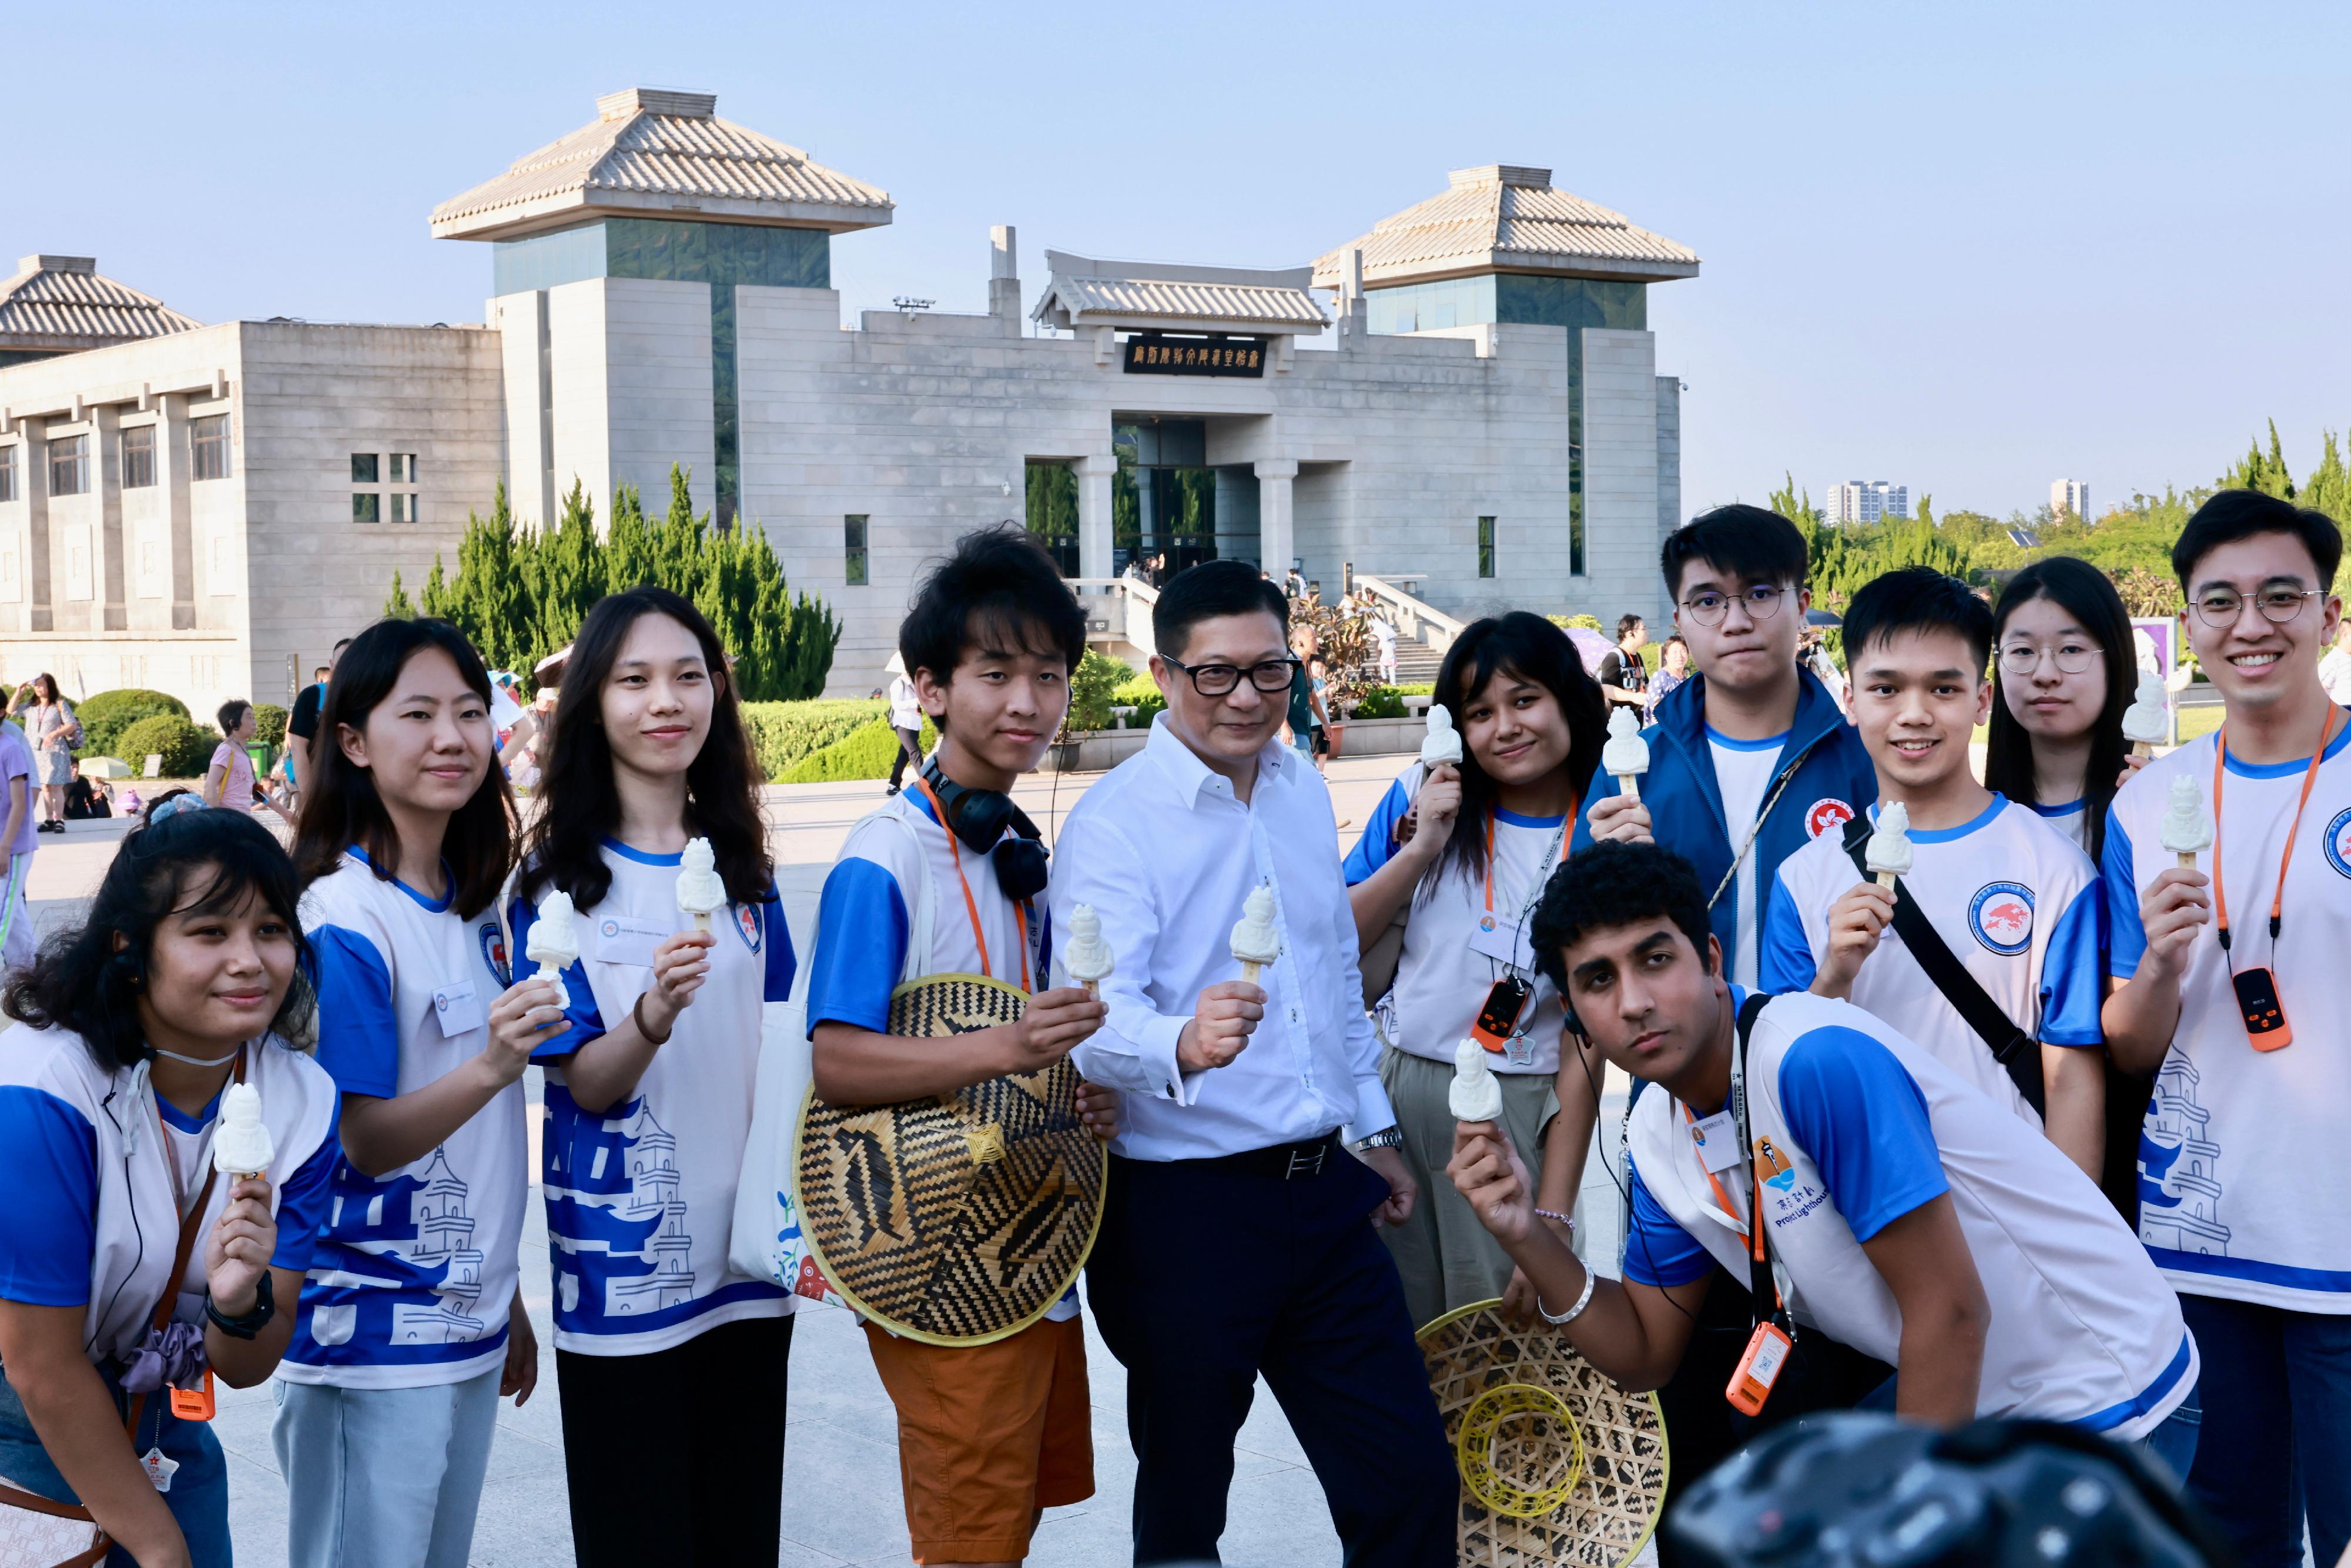 The Secretary for Security, Mr Tang Ping-keung, led members of the Security Bureau Youth Uniformed Group Leaders Forum and non-Chinese speaking students of Project Lighthouse to visit Shaanxi and Beijing. Photo shows Mr Tang (fifth left) with the youth groups' members after touring the Emperor Qinshihuang's Mausoleum Site Museum in Xi'an on August 14.